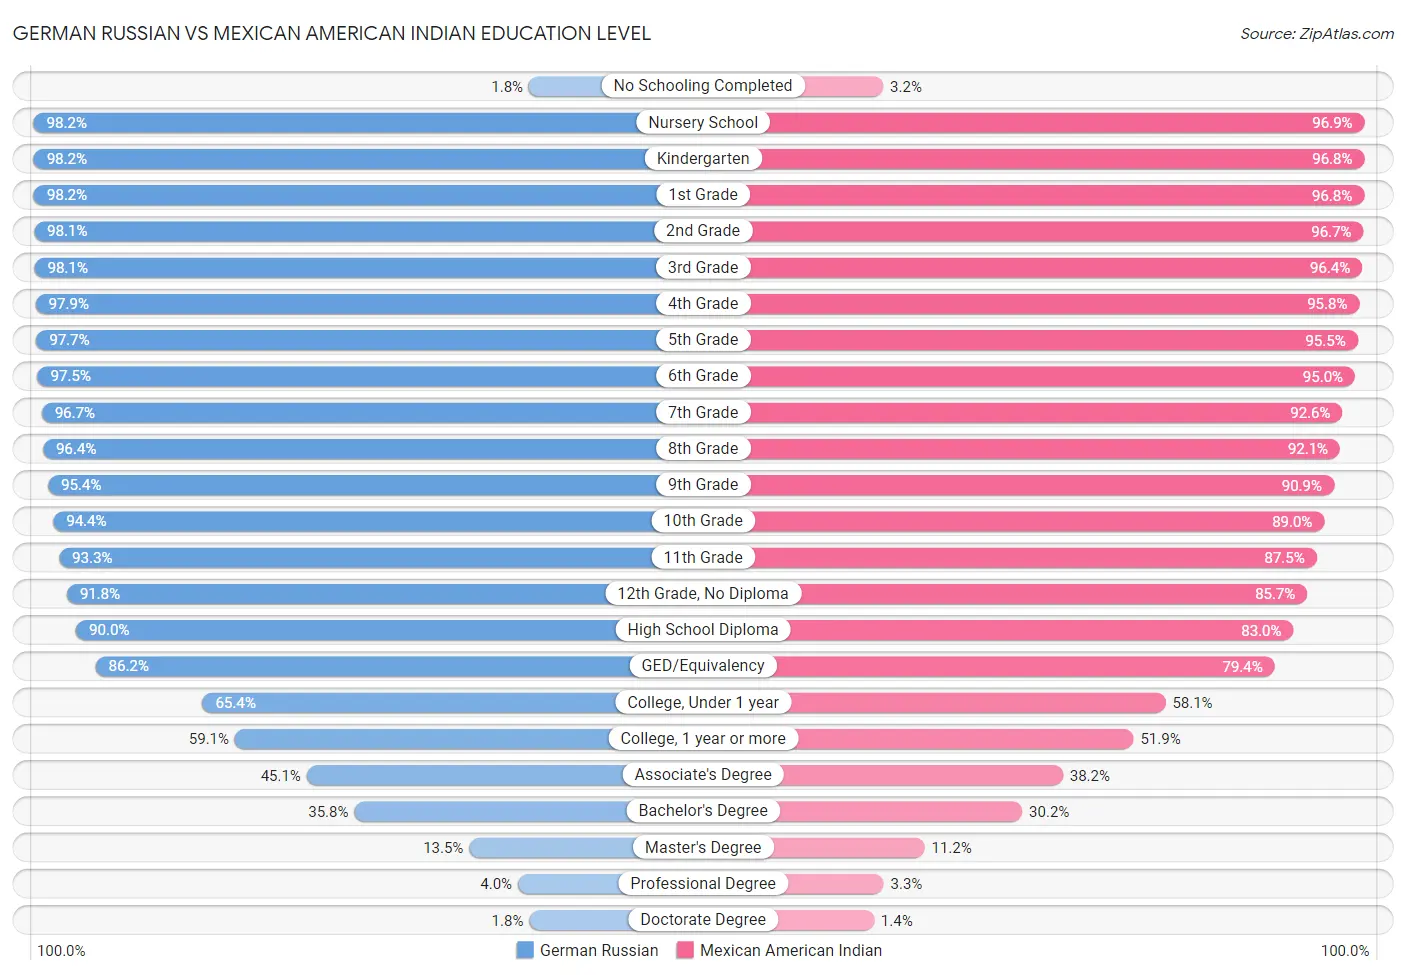 German Russian vs Mexican American Indian Education Level